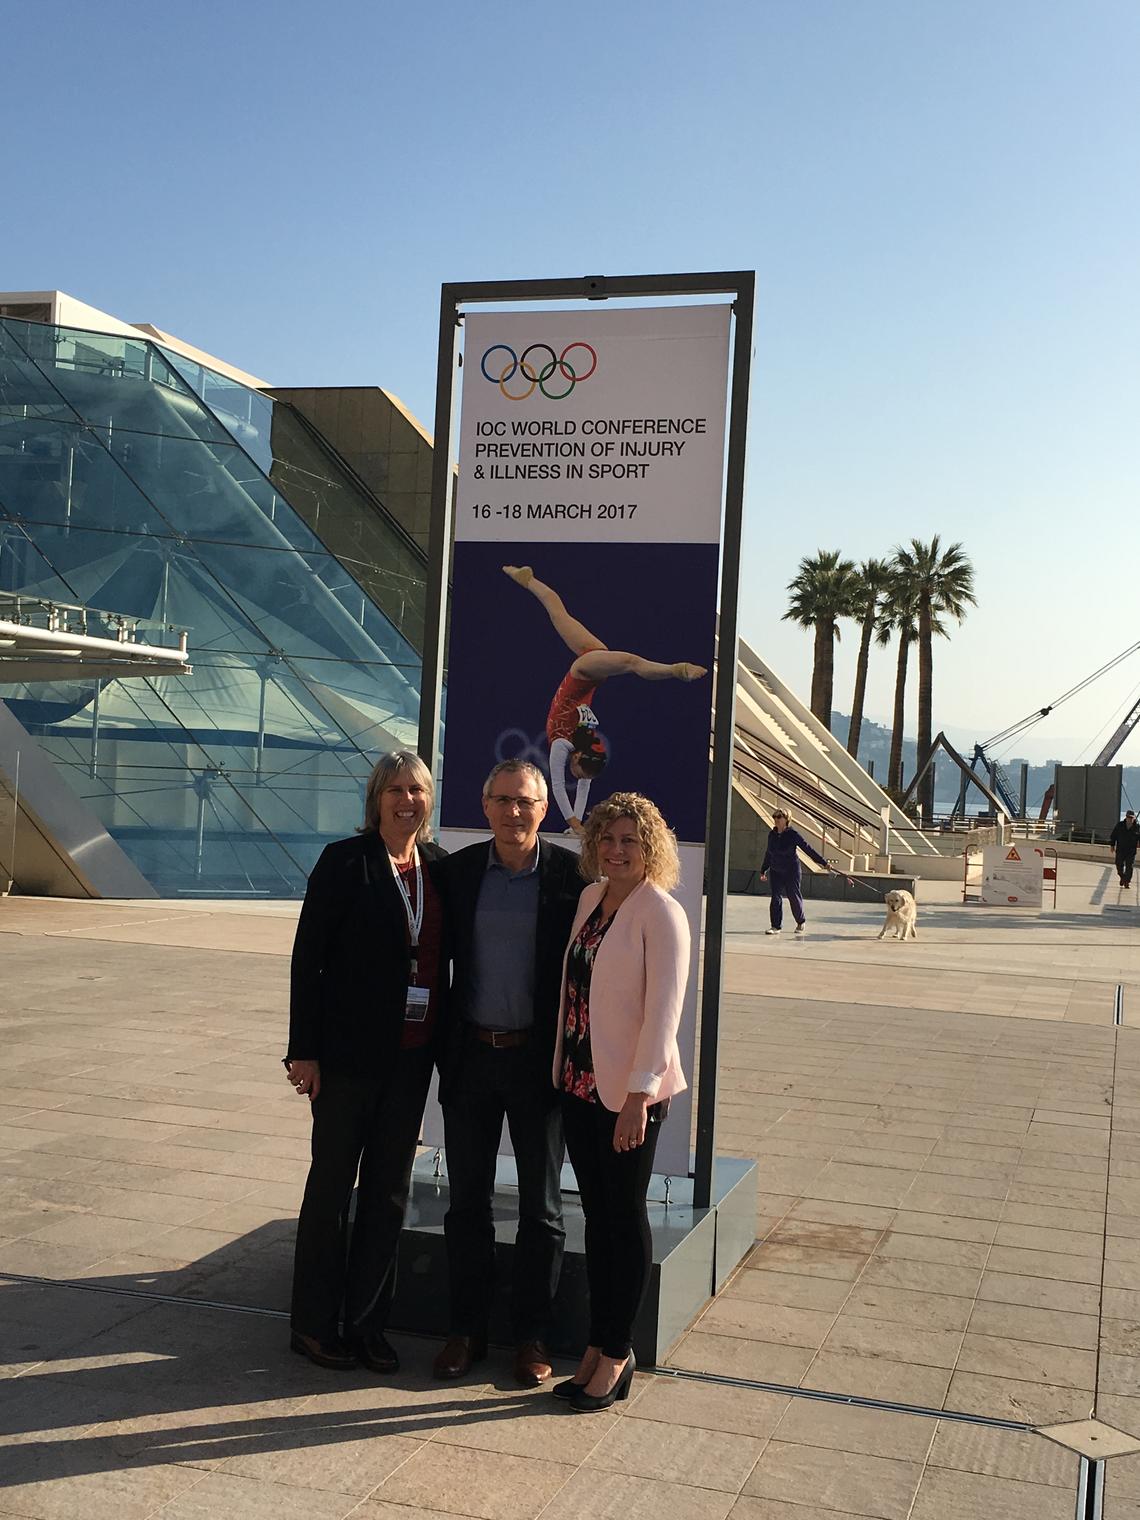 Carolyn Emery, left, Willem Meeuwisse, and Kathryn Schneider at the International Olympic Committee World Conference in Monaco in March.